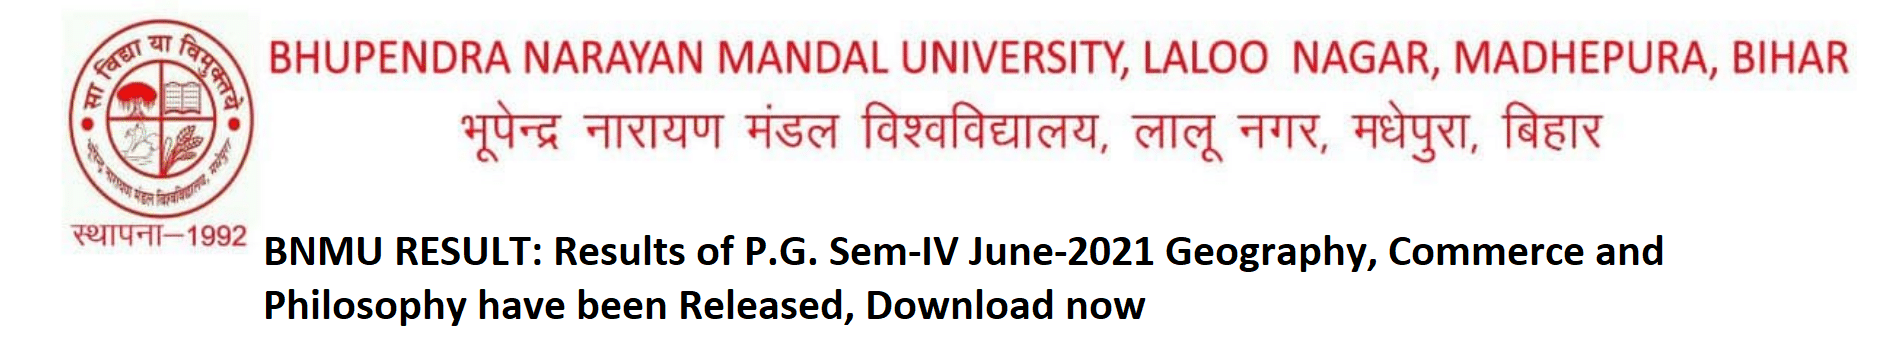 BNMU RESULT: Results of P.G. Sem-IV June-2021 Geography, Commerce and Philosophy have been Released, Download now